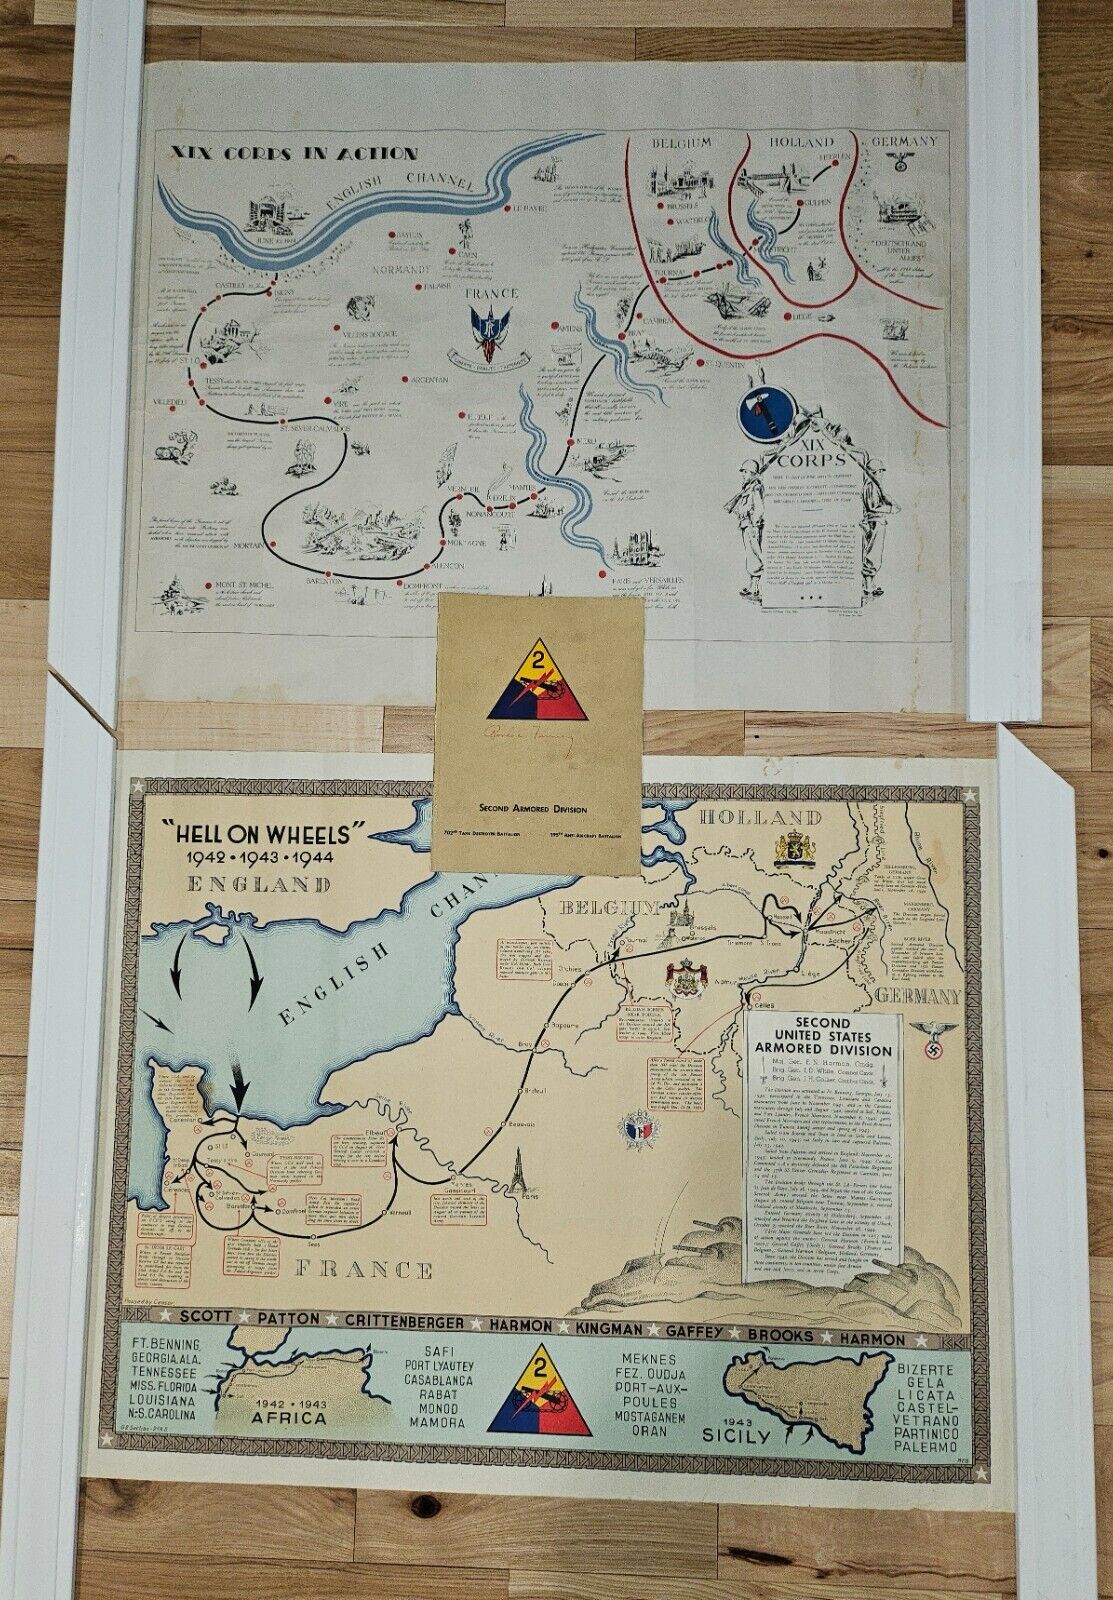 WWII maps 1944 HELL ON WHEELS , XIX CORP IN ACTION 2nd Armored Div corp. soldier